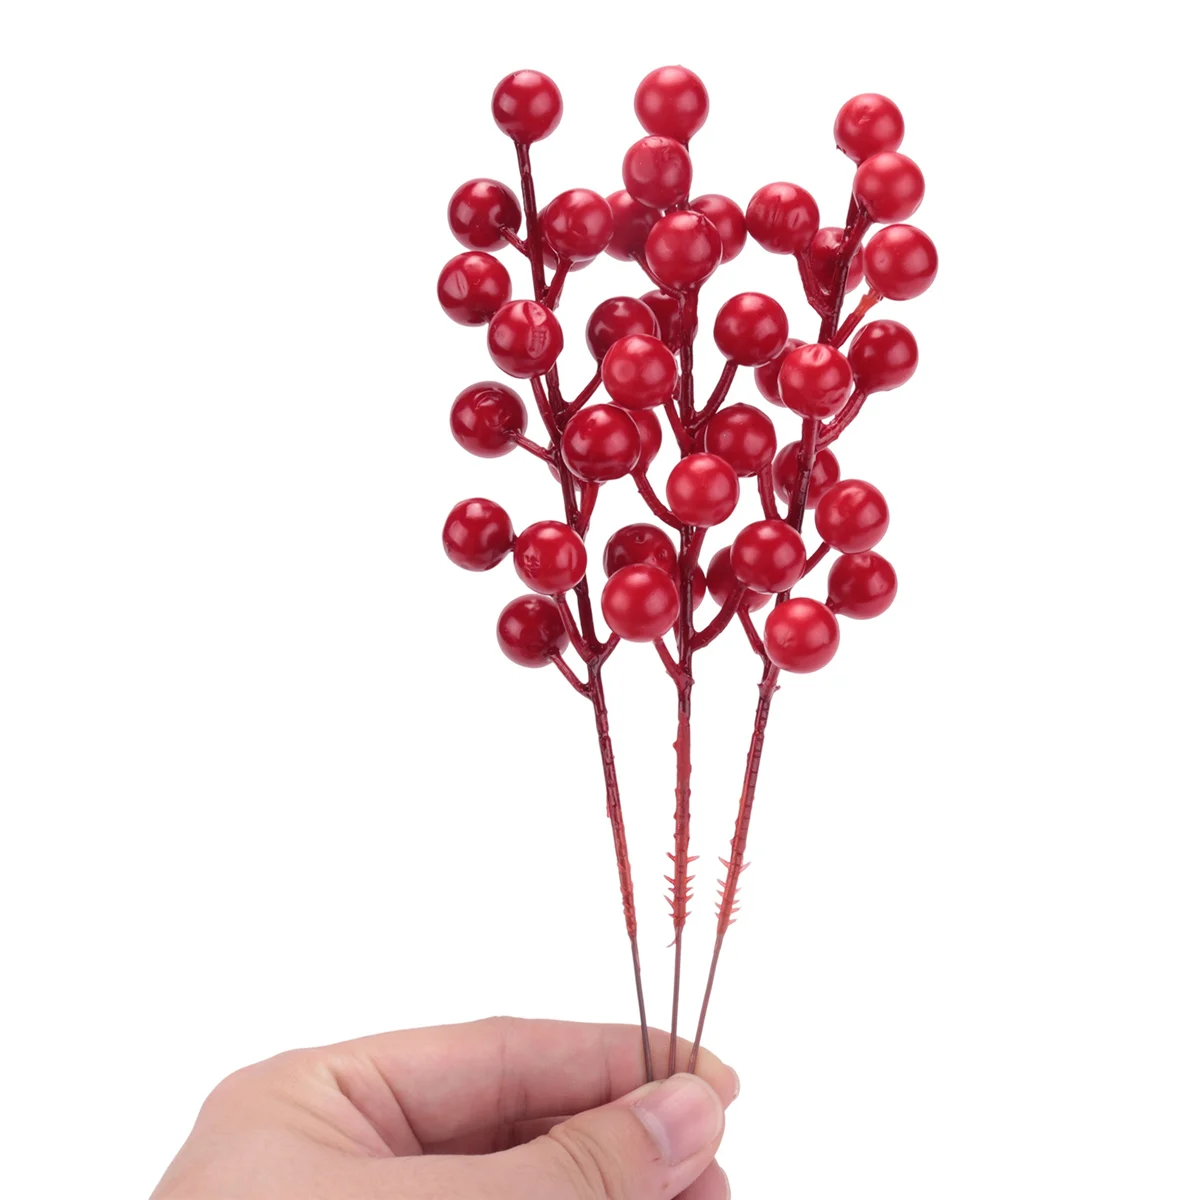 

20 Pack 8inch Artificial Christmas Red Berries Stems for Christmas Tree Ornaments,DIY Xmas Wreath,Holiday and Home Decor